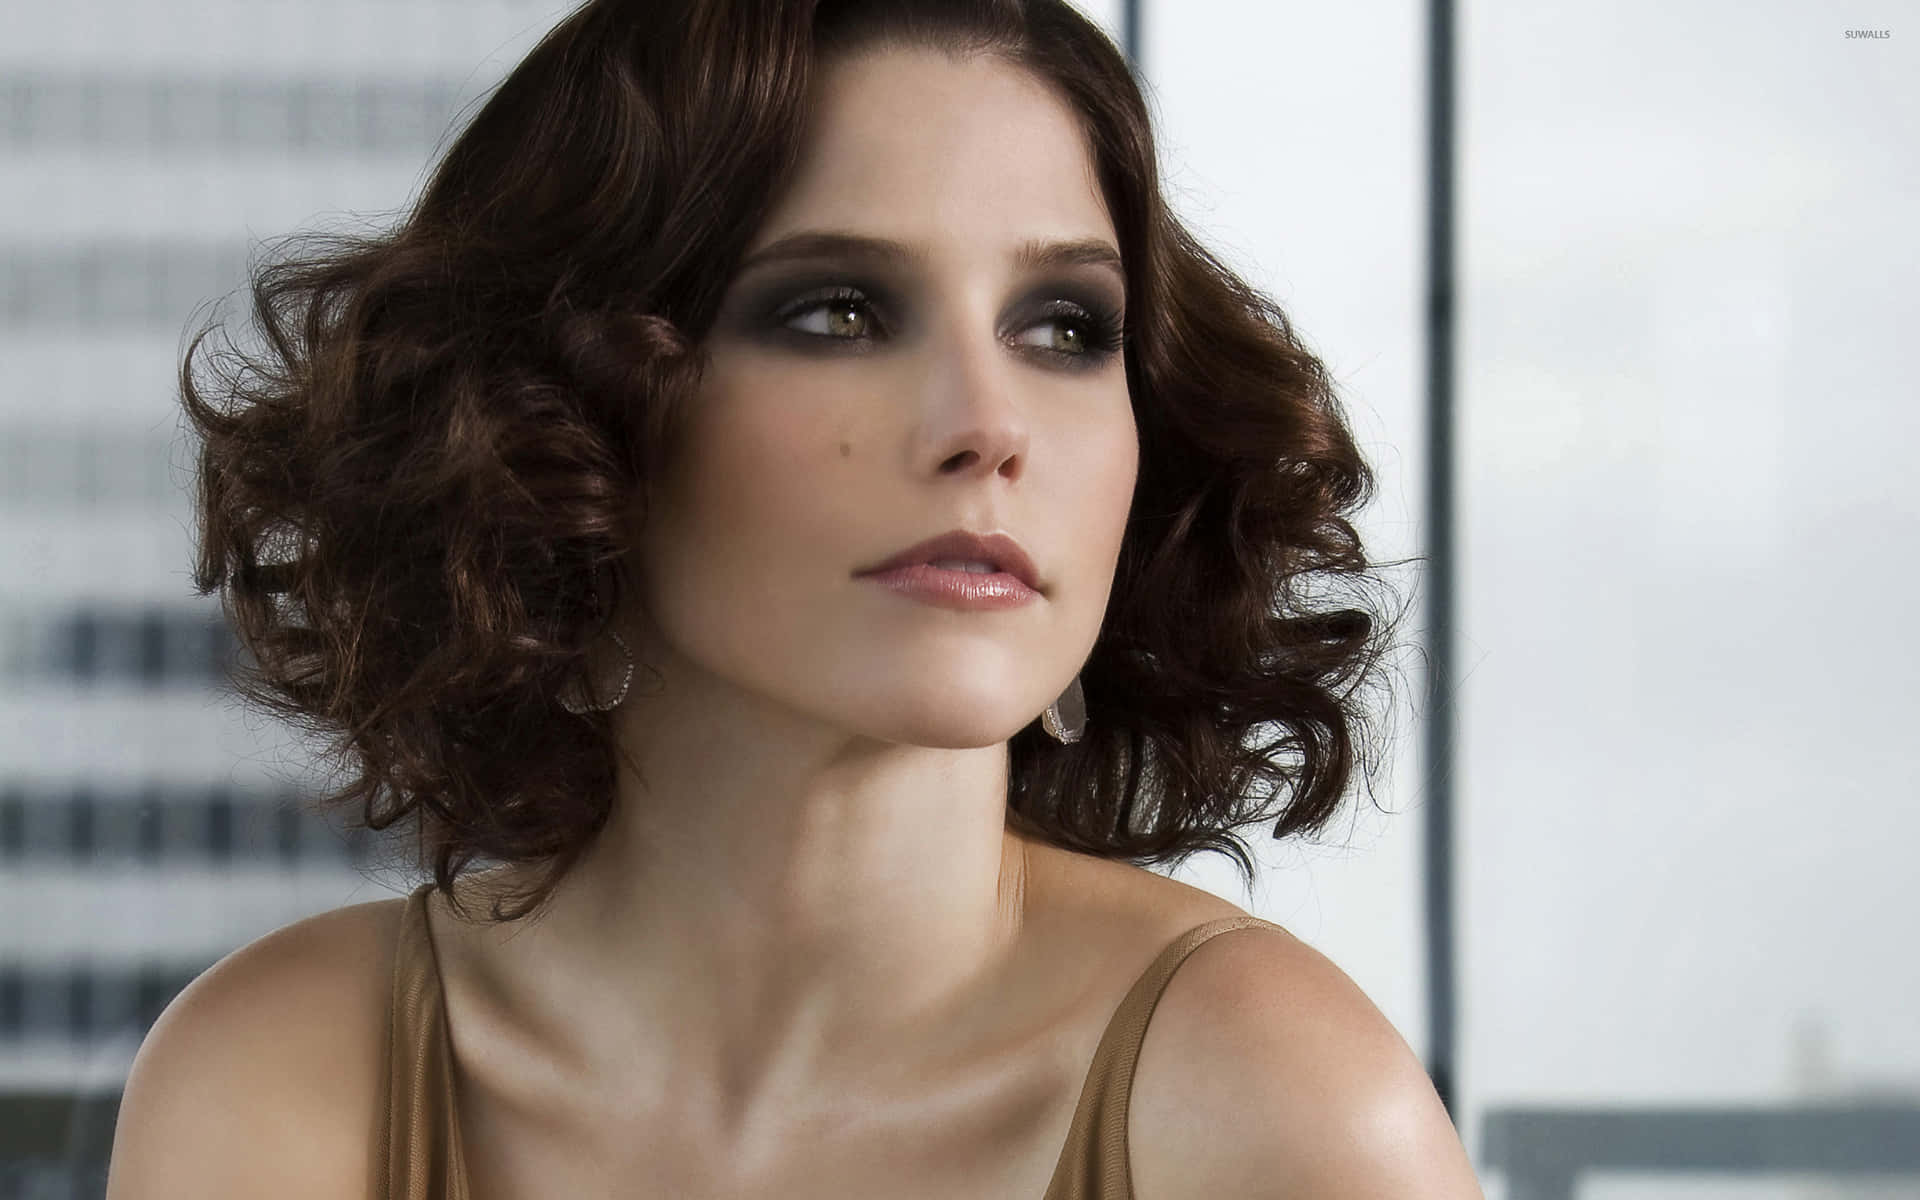 Sophia Bush Is A Multifaceted Talent With A Famously Successful Career Background